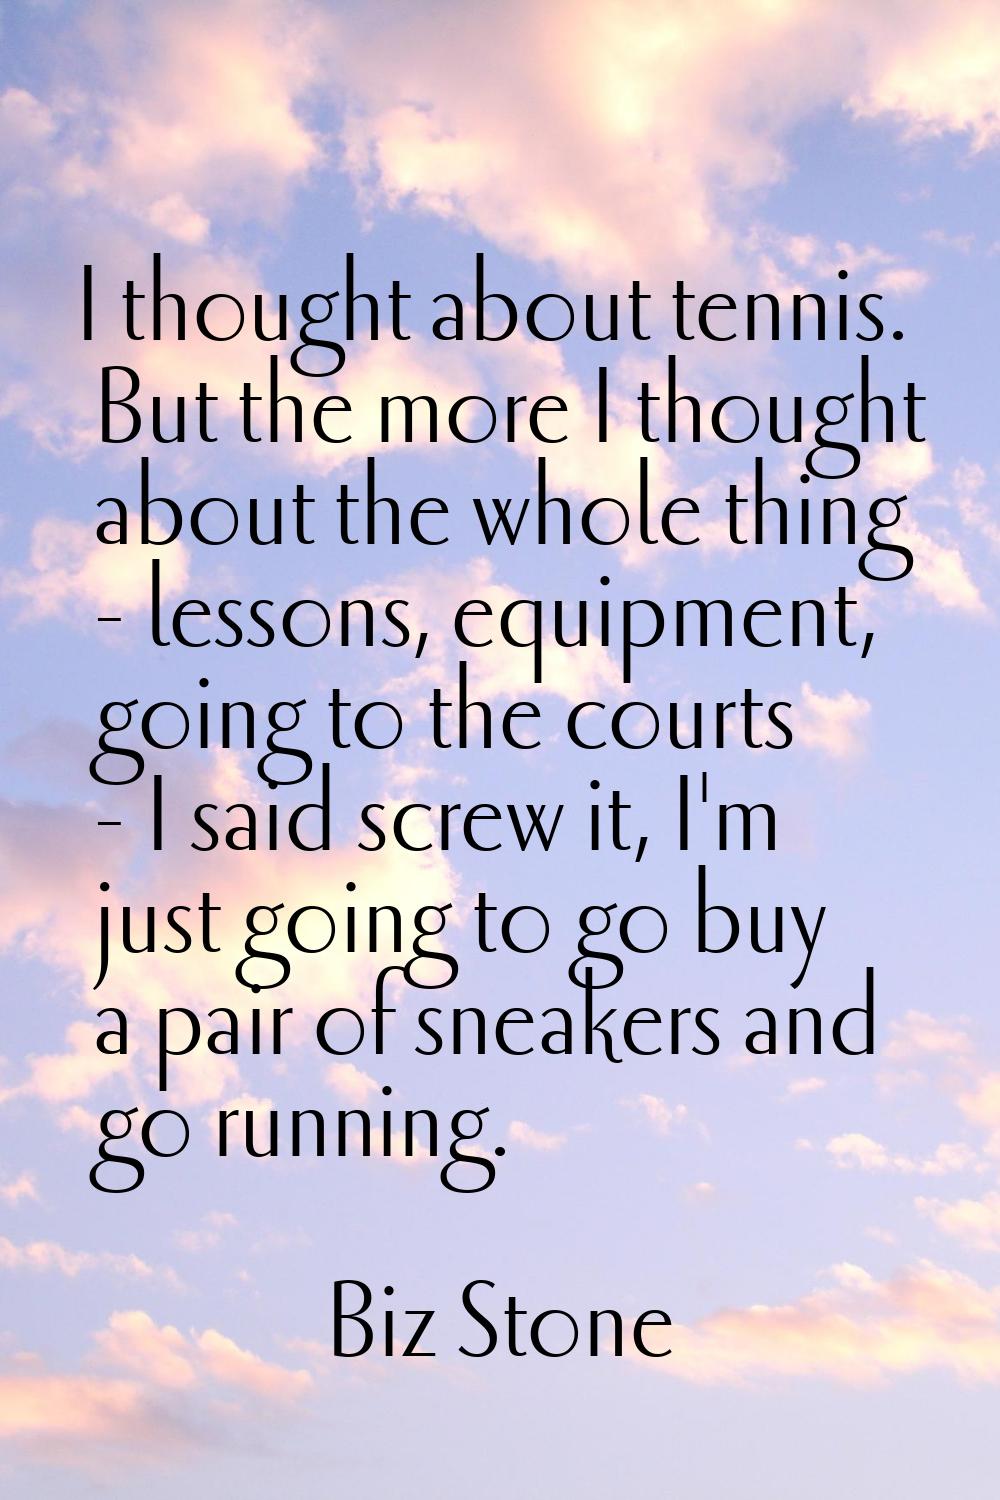 I thought about tennis. But the more I thought about the whole thing - lessons, equipment, going to